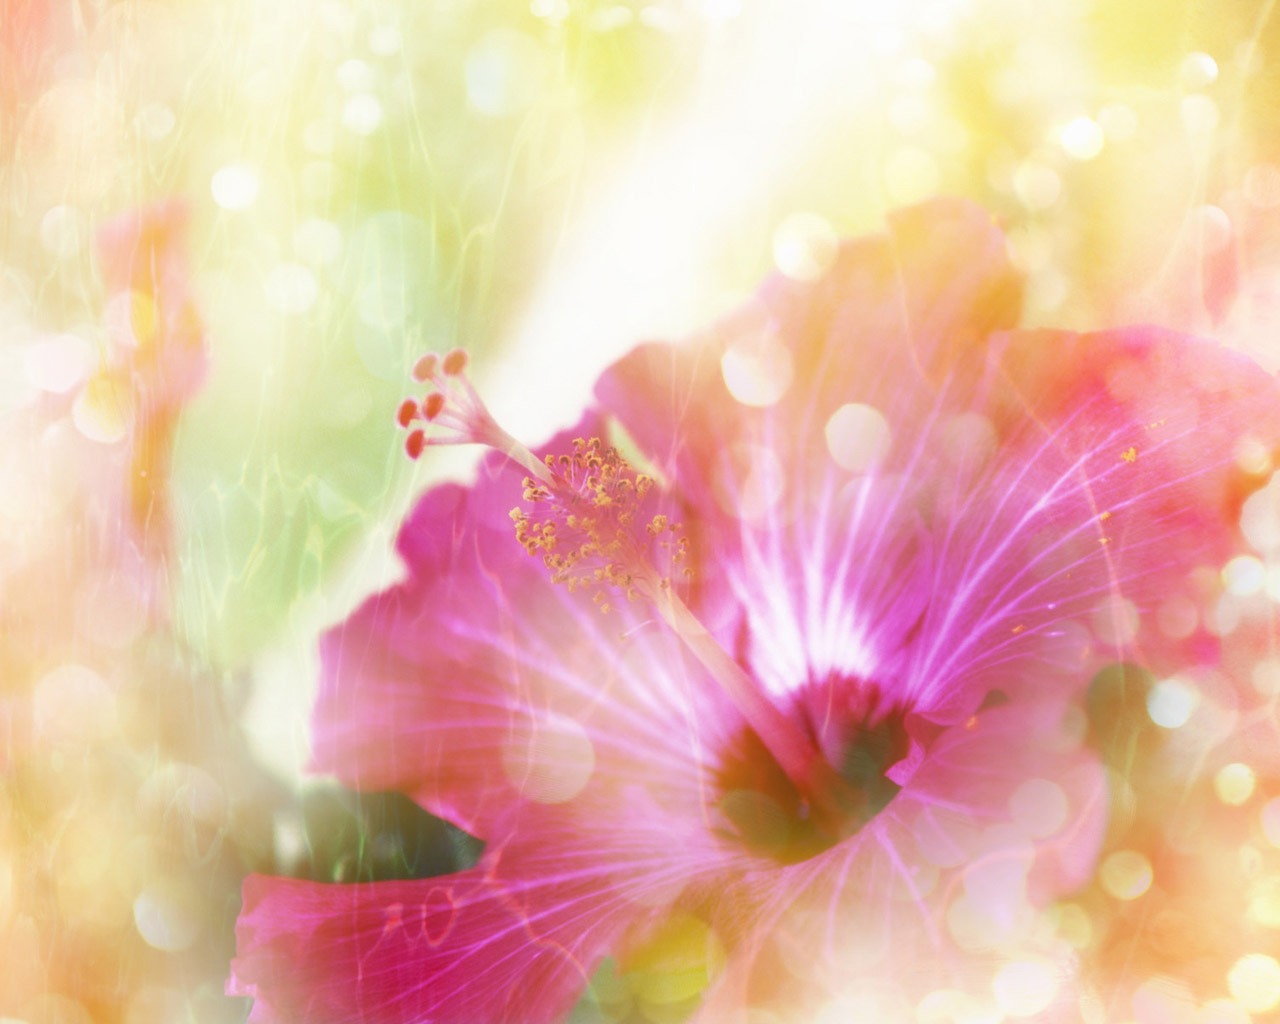 Fantasy CG Background Flower Wallpapers #18 - 1280x1024